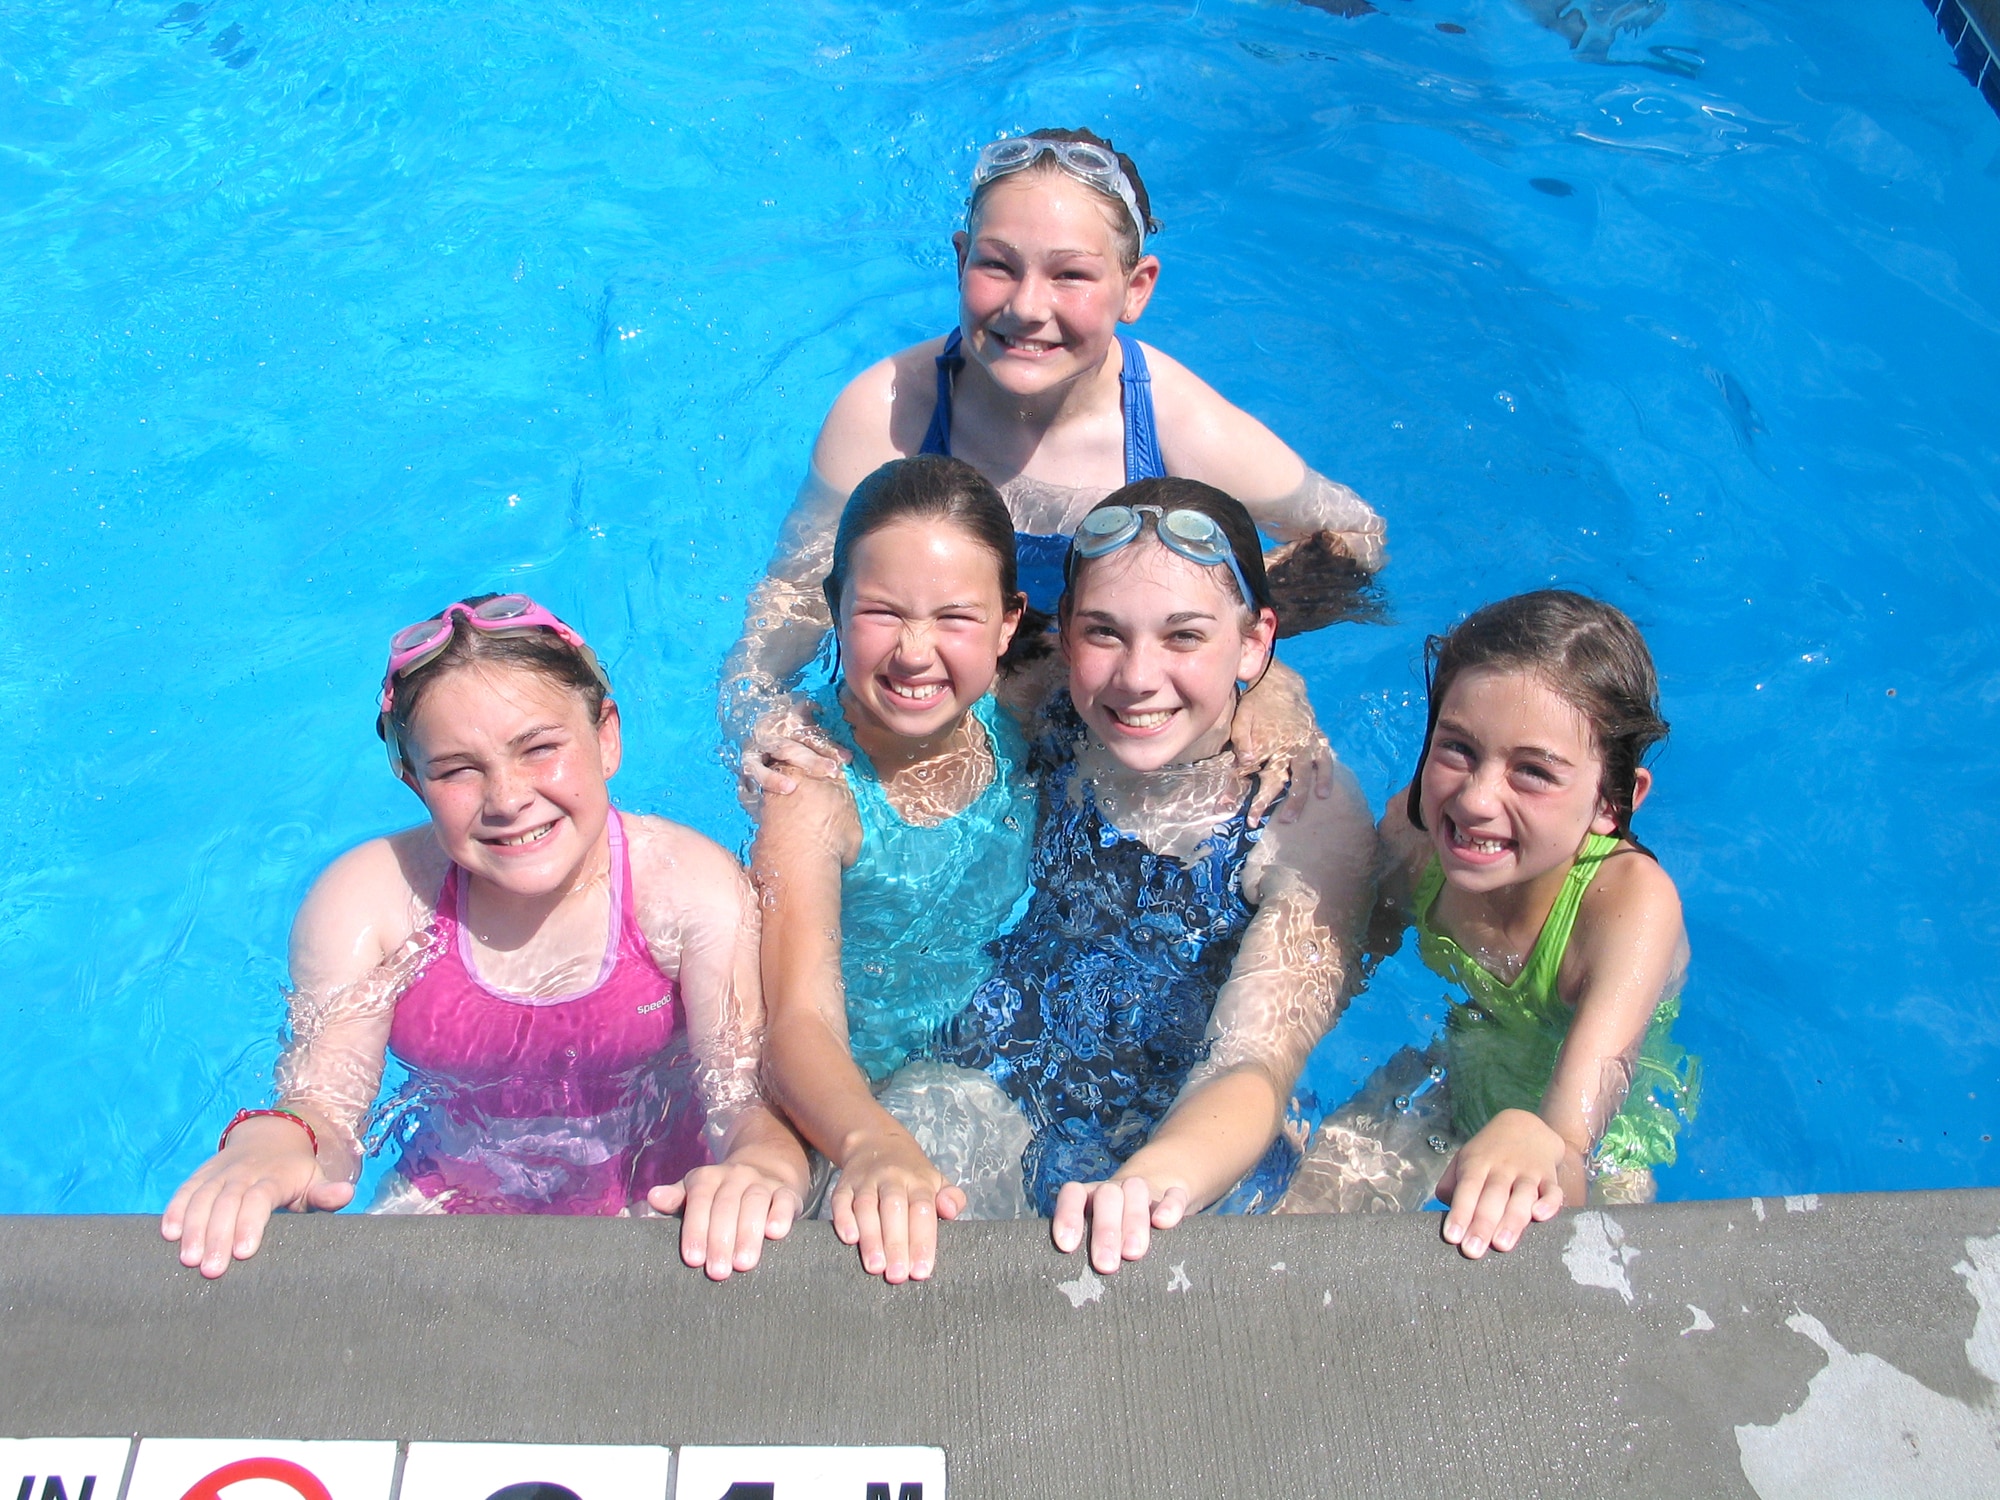 FAIRCHILD AIR FORCE BASE, Wash. – The base outdoor pool here is now open for business. From left, Emilee Melville, 9; Mireille Beaubien, 10; Kelli and Joanie Melville, 12 and 16; and Nicole Beaubien, 8, swim the afternoon away June 20. The Melville sisters are daughters of Col. Mark Melville, 92nd Operations Group commander, and the Beaubien sisters are daughters of Lt. Col. Seth Beaubien, 509th Weapons Squadron commander. The outdoor pool is open weekdays, 1 – 5 p.m., and weekends, noon – 5 p.m. (U.S. Air Force photo/Staff Sgt. Connie L. Bias)
